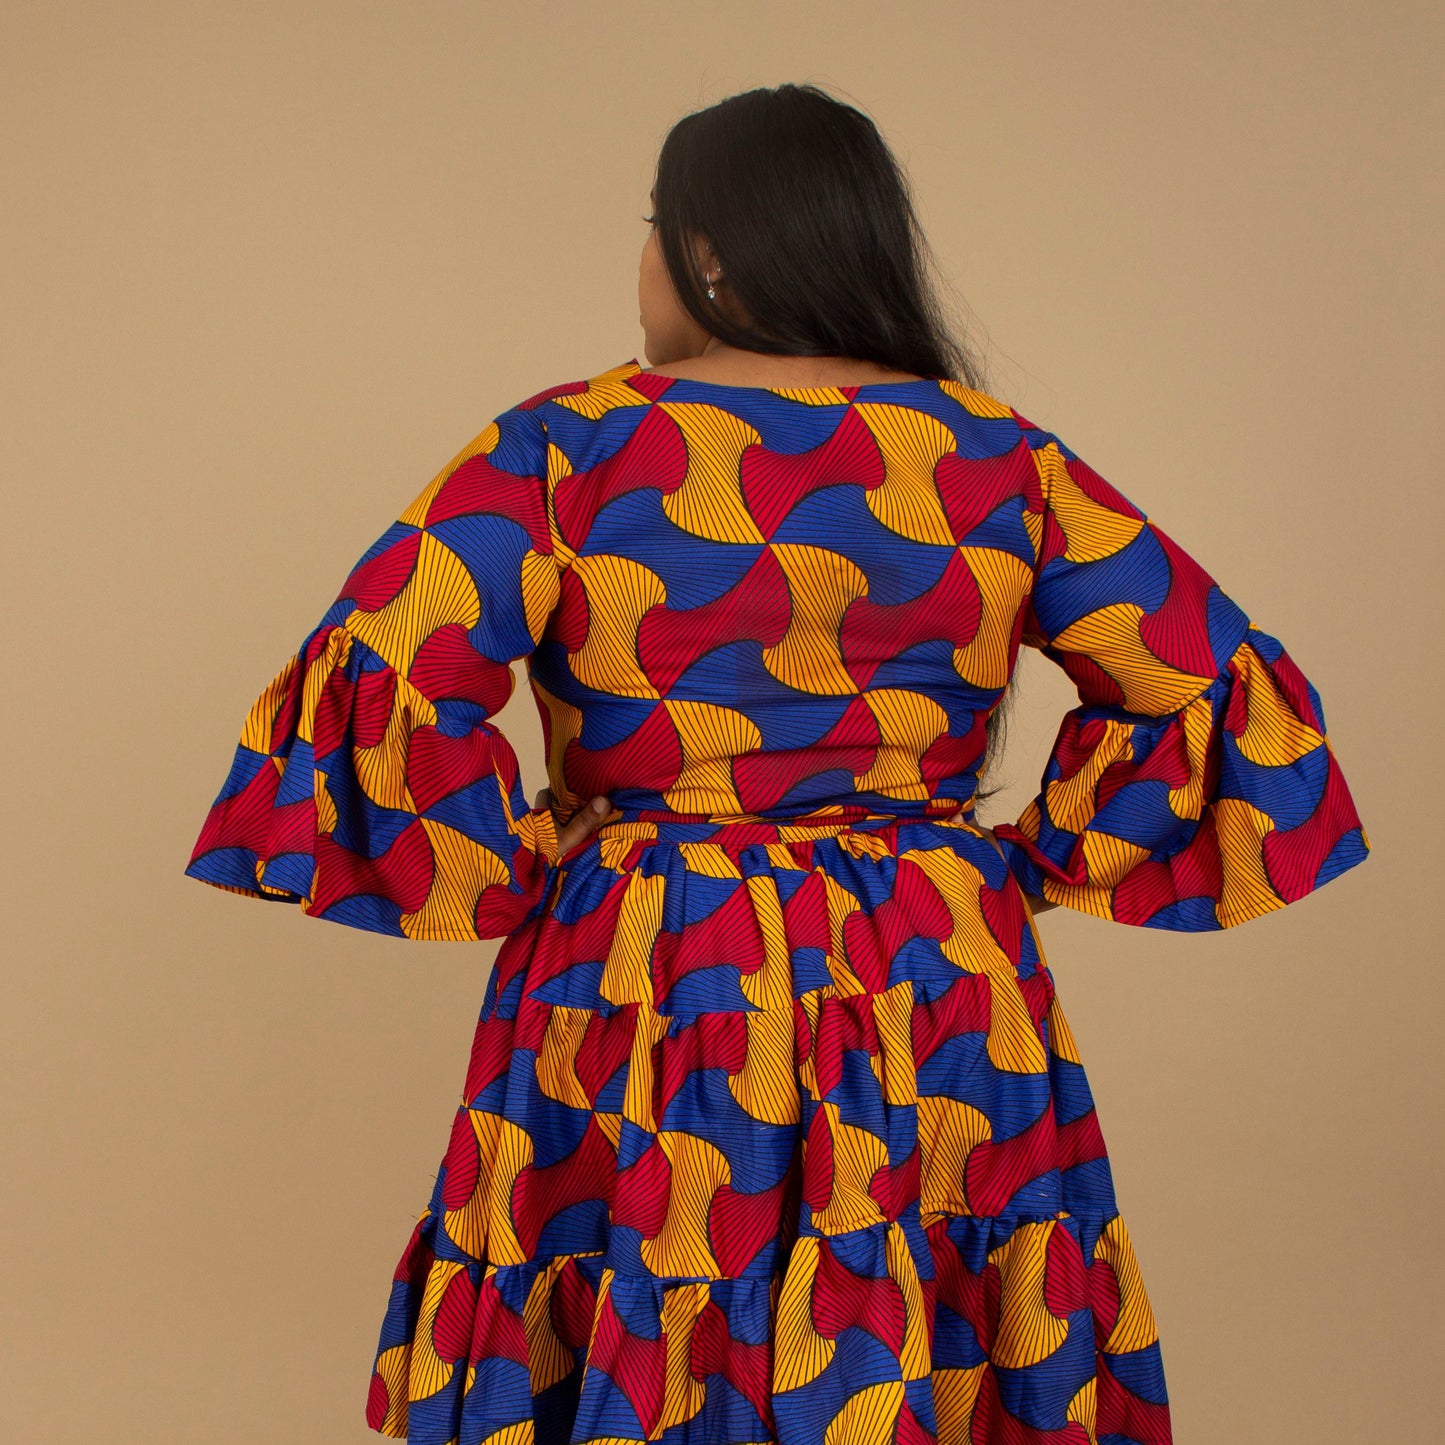 The Kano African Printed ruffled dress features an Ankara wax Print Belted Trim in a gorgeous blue, red and yellow multi-colored swirling geometric African Print pattern on sustainable cotton. Designed in England Made in Nigeria, Available in standard and plus sizes (UK 8-32). 